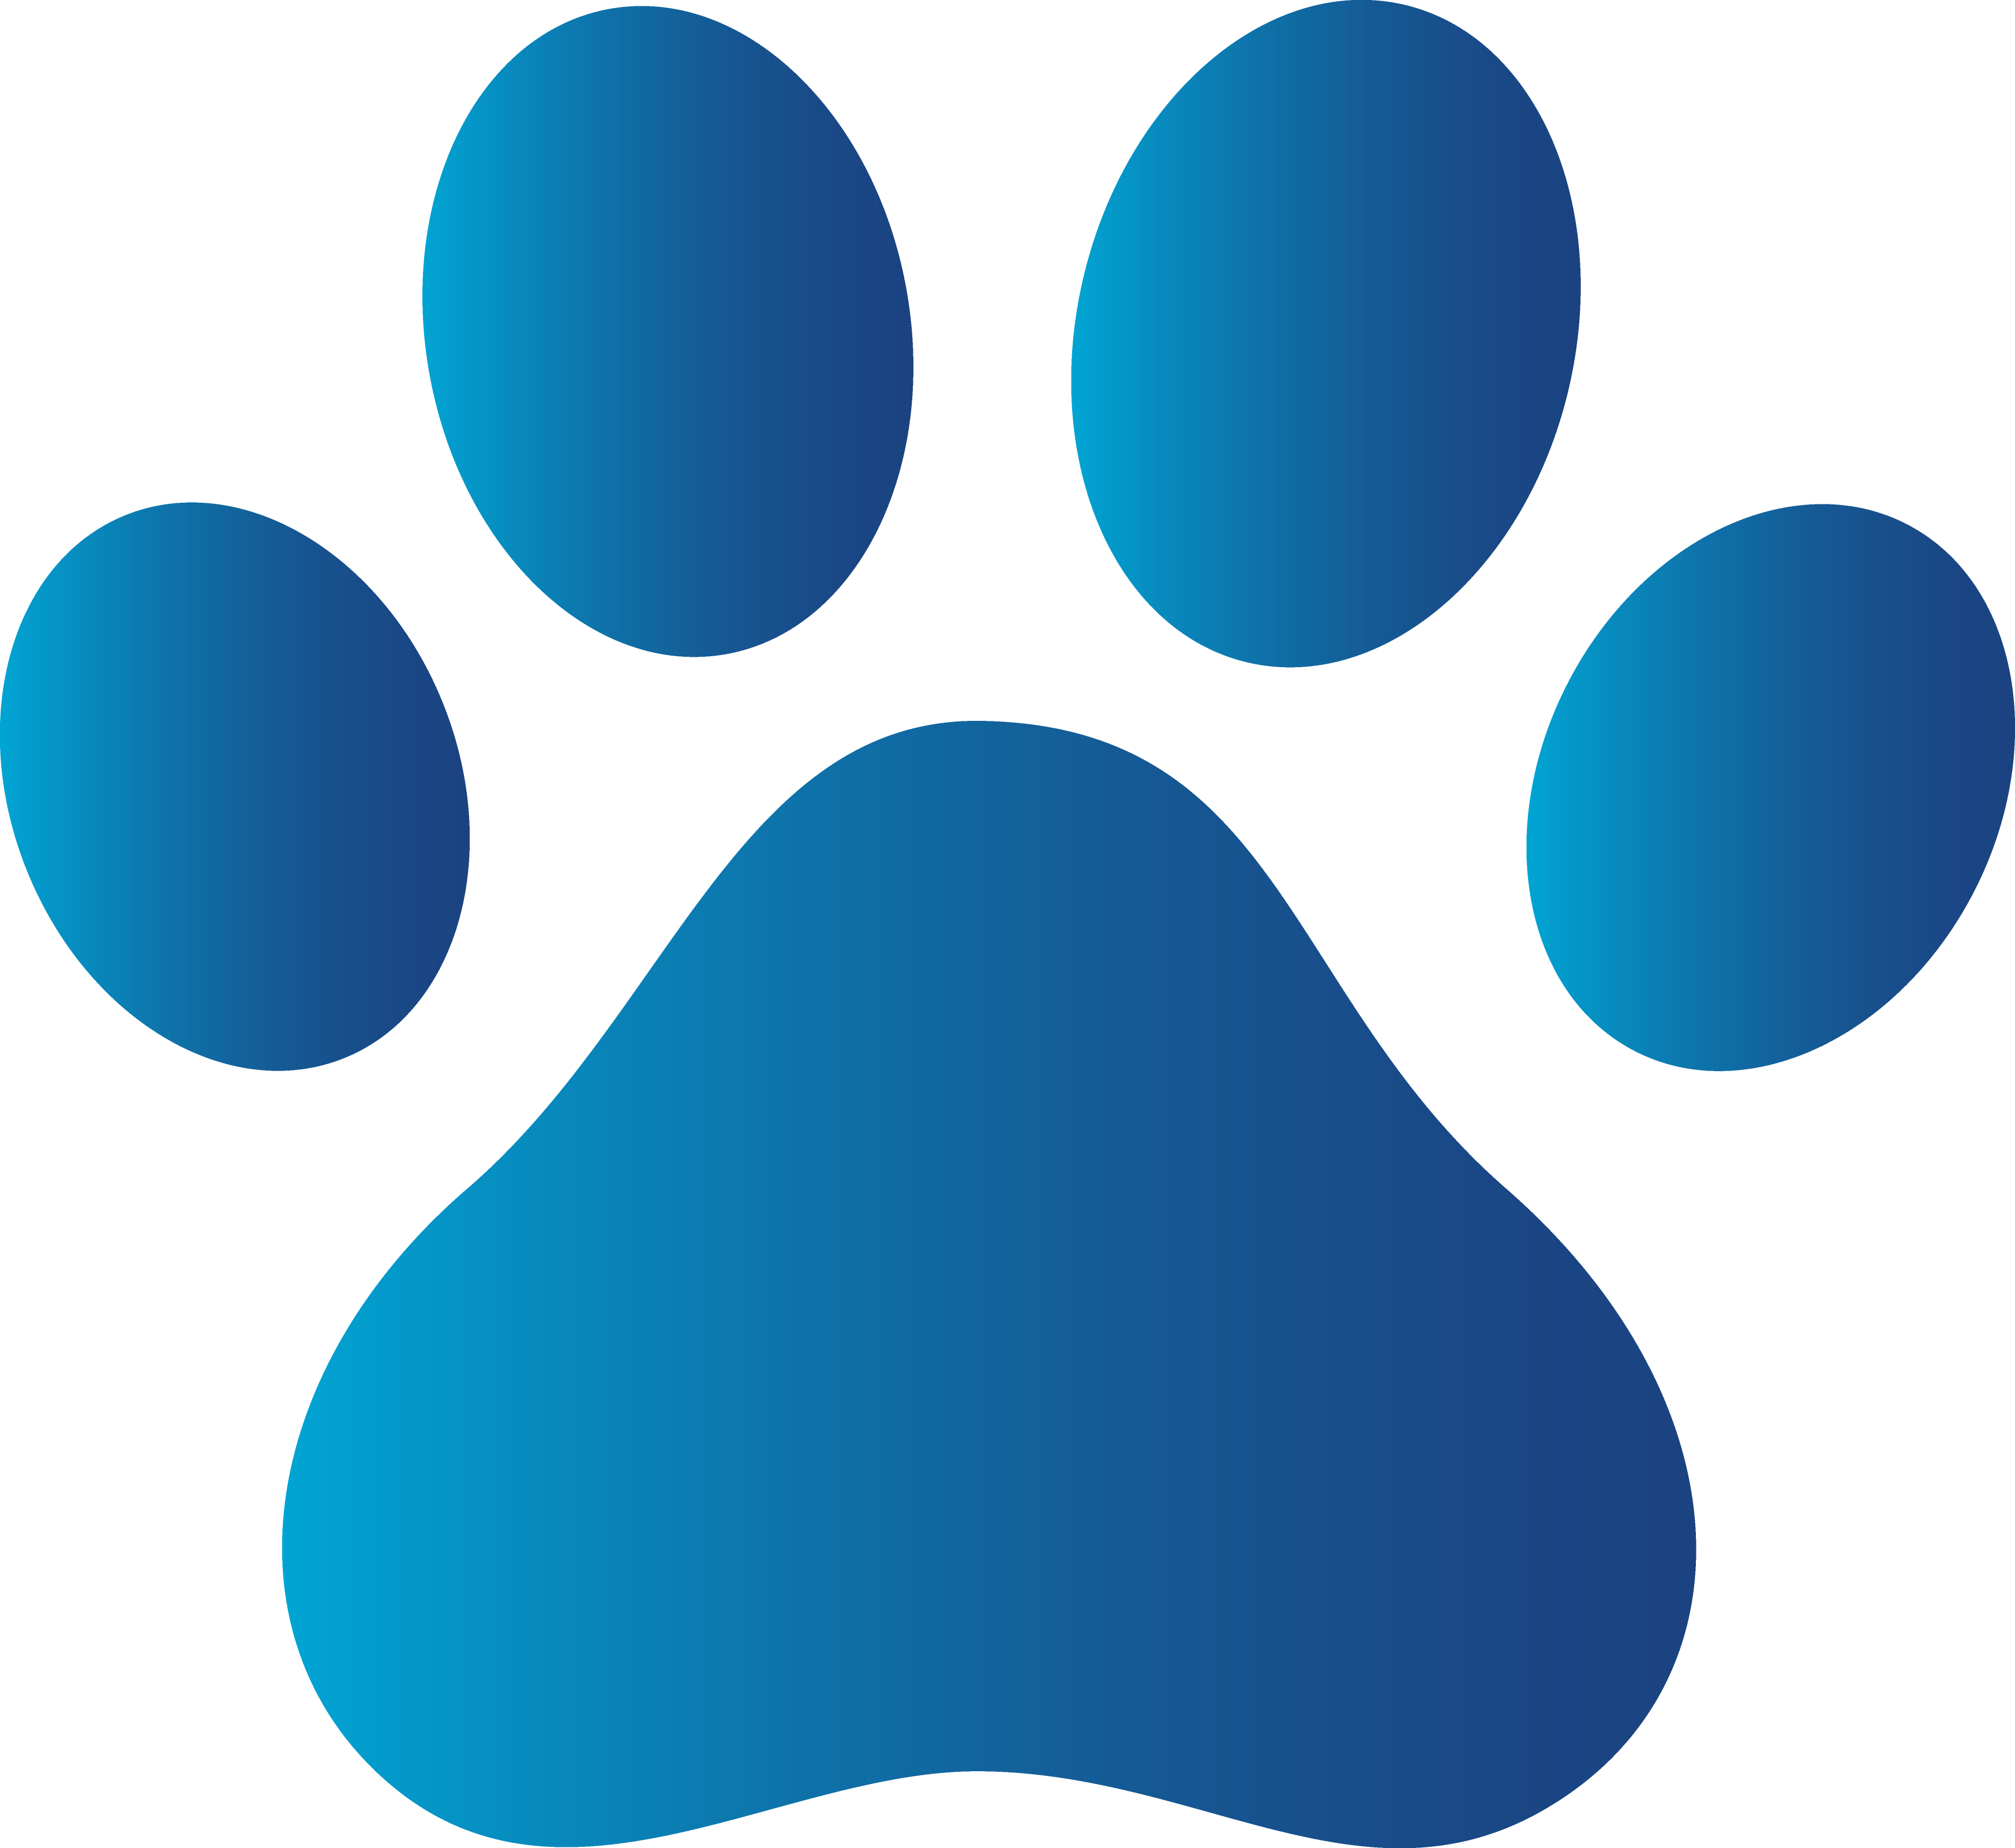 Free Dog Paw Print Clip Art - Cliparts.co